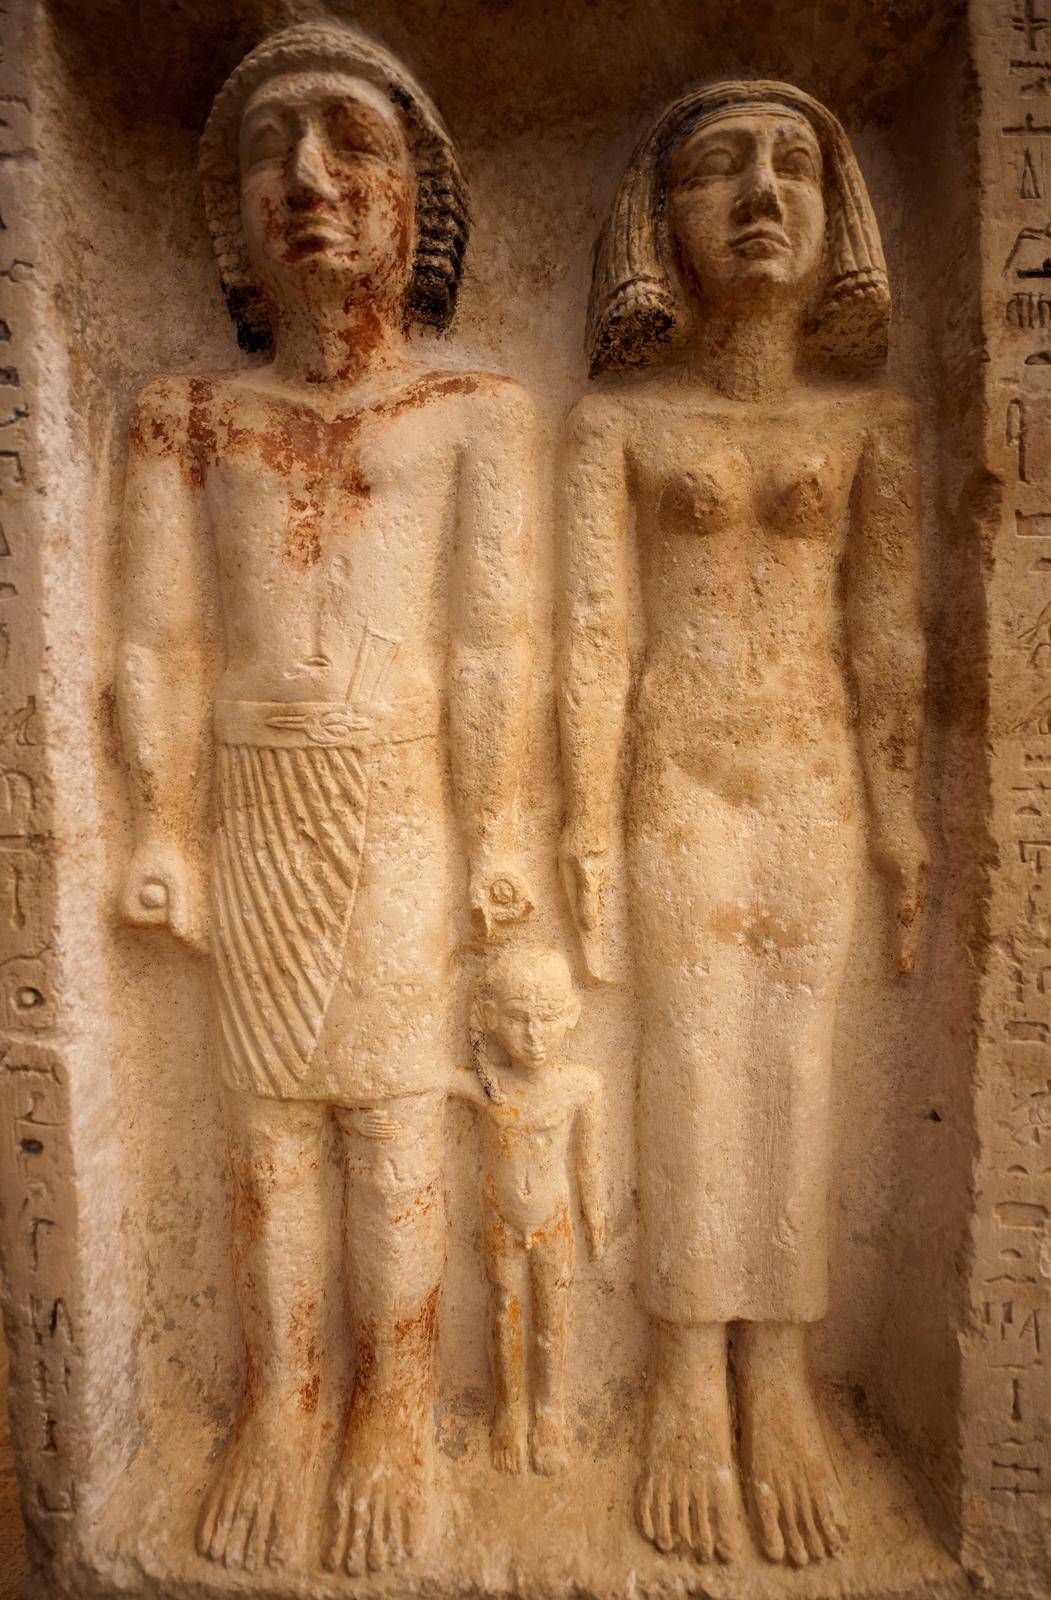 Statues are displayed after the announcement of 4,300-year-old sealed tombs discovered in Egypt's Saqqara necropolis, in Giza